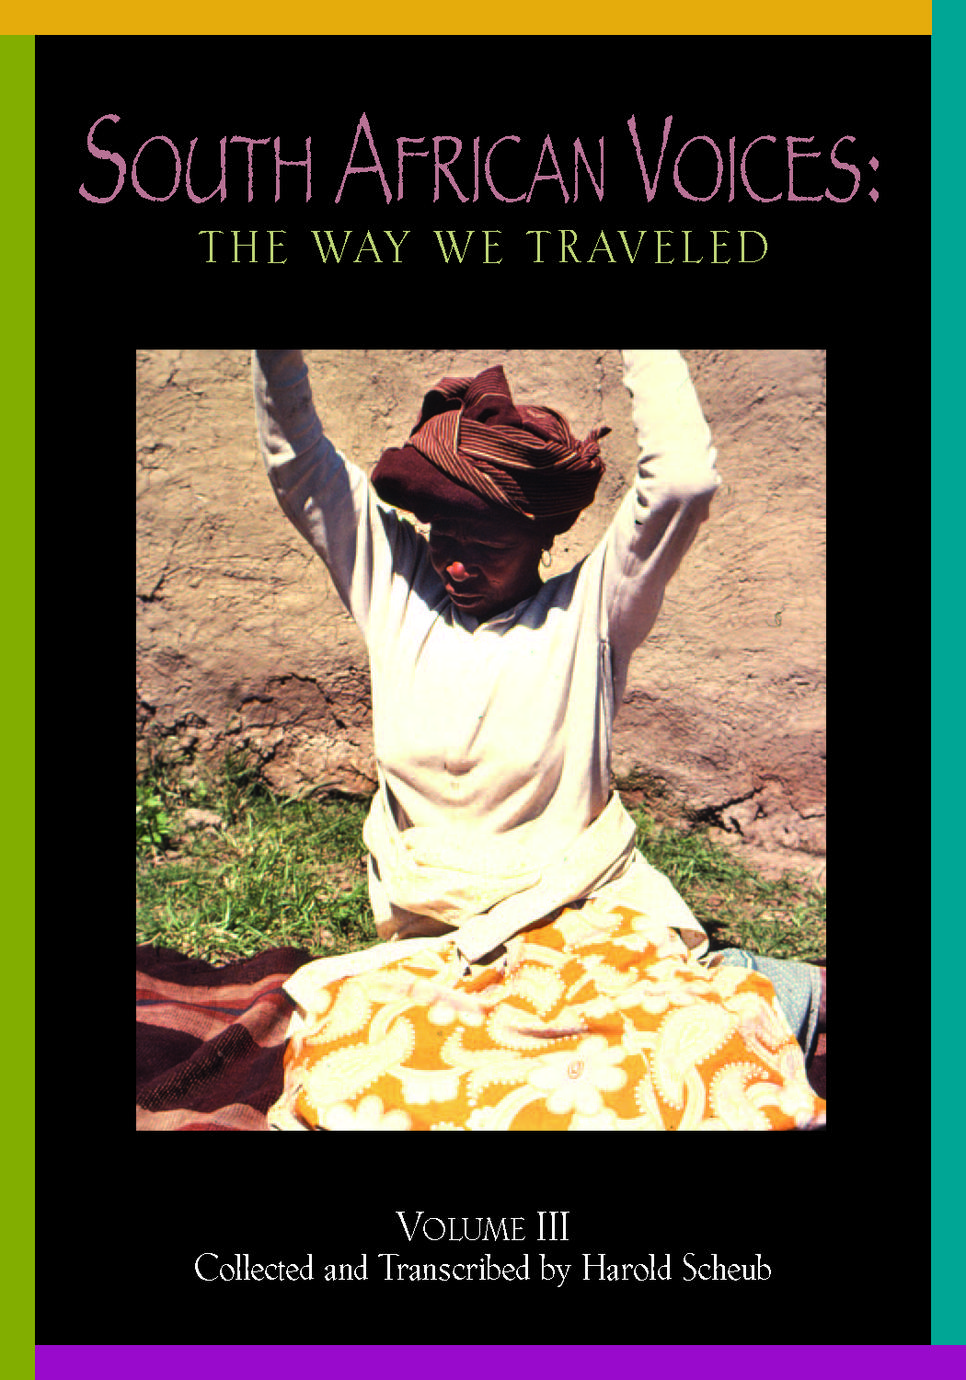 Cover image: South African Voices : The Way We Travelled. Volume III. Collected and Transcribed by Harold Scheub.